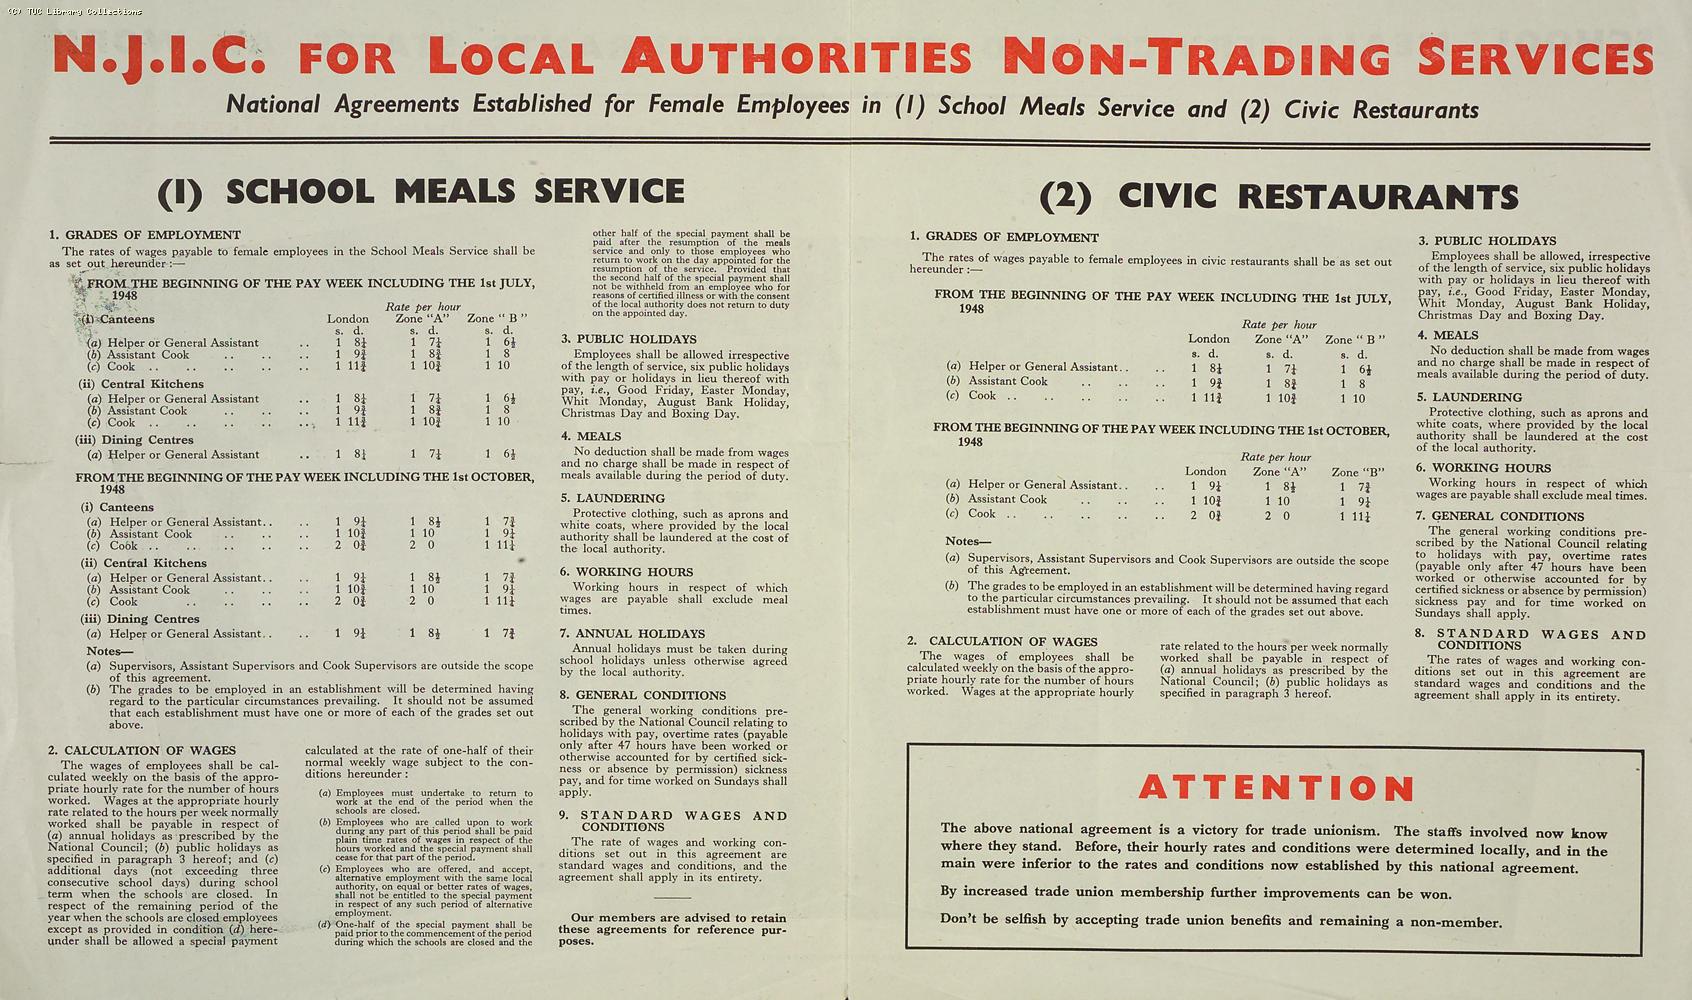 Pay agreement for Civic Restaurant and School Meals Staff, 1948